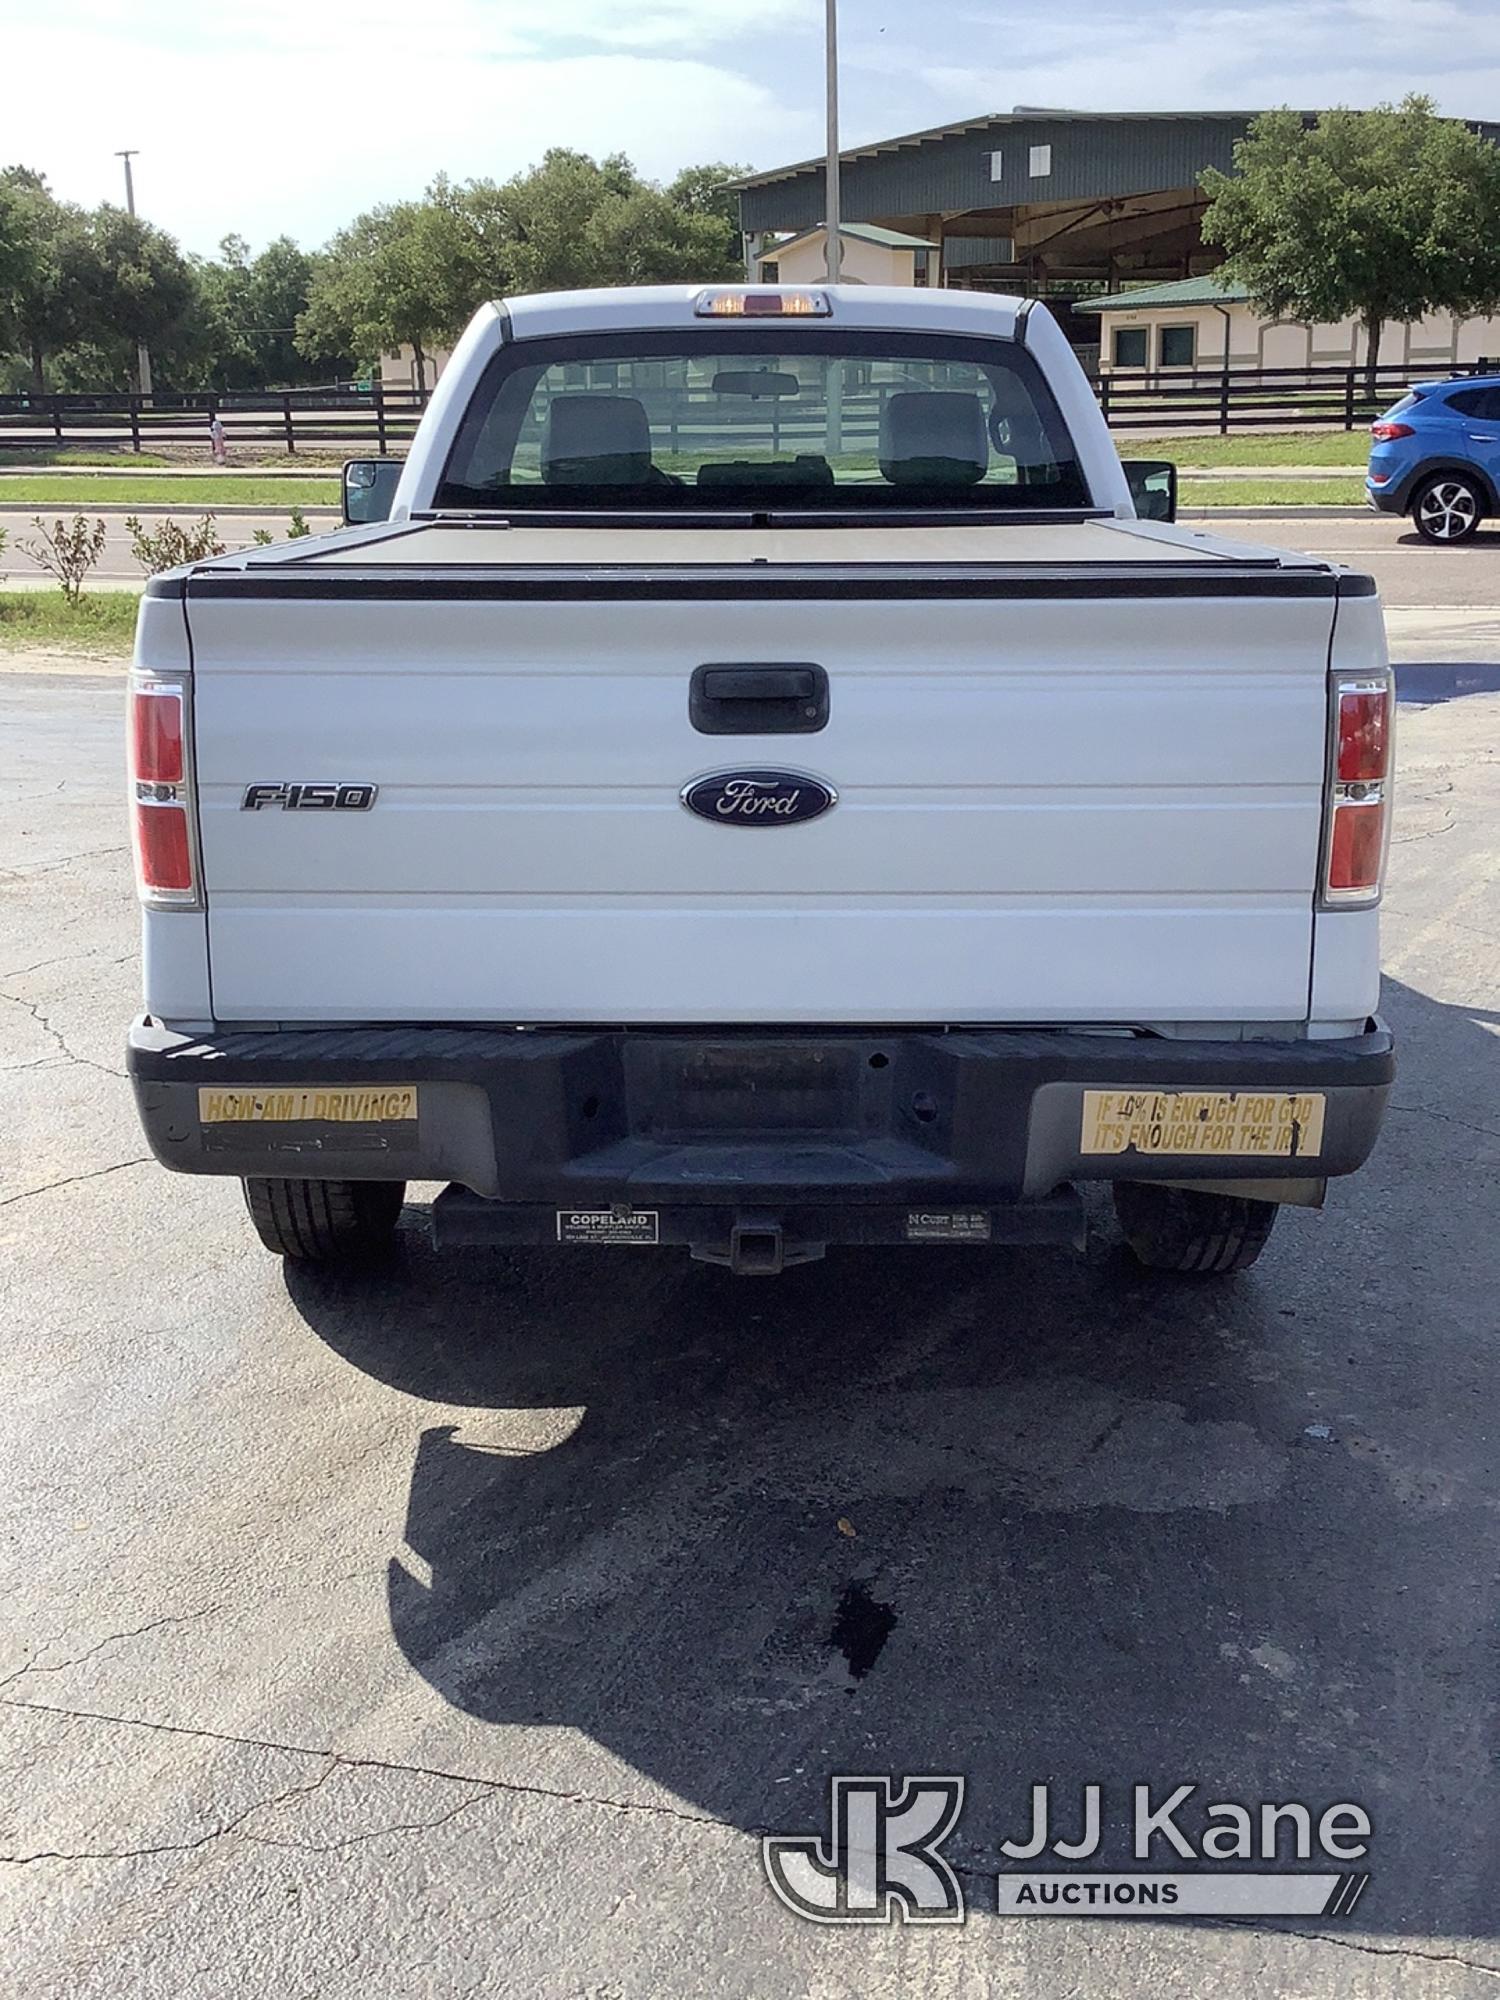 (Ocala, FL) 2013 Ford F150 Pickup Truck Runs, Moves) (Minor Body And Paint Damage, Small Crack In Wi